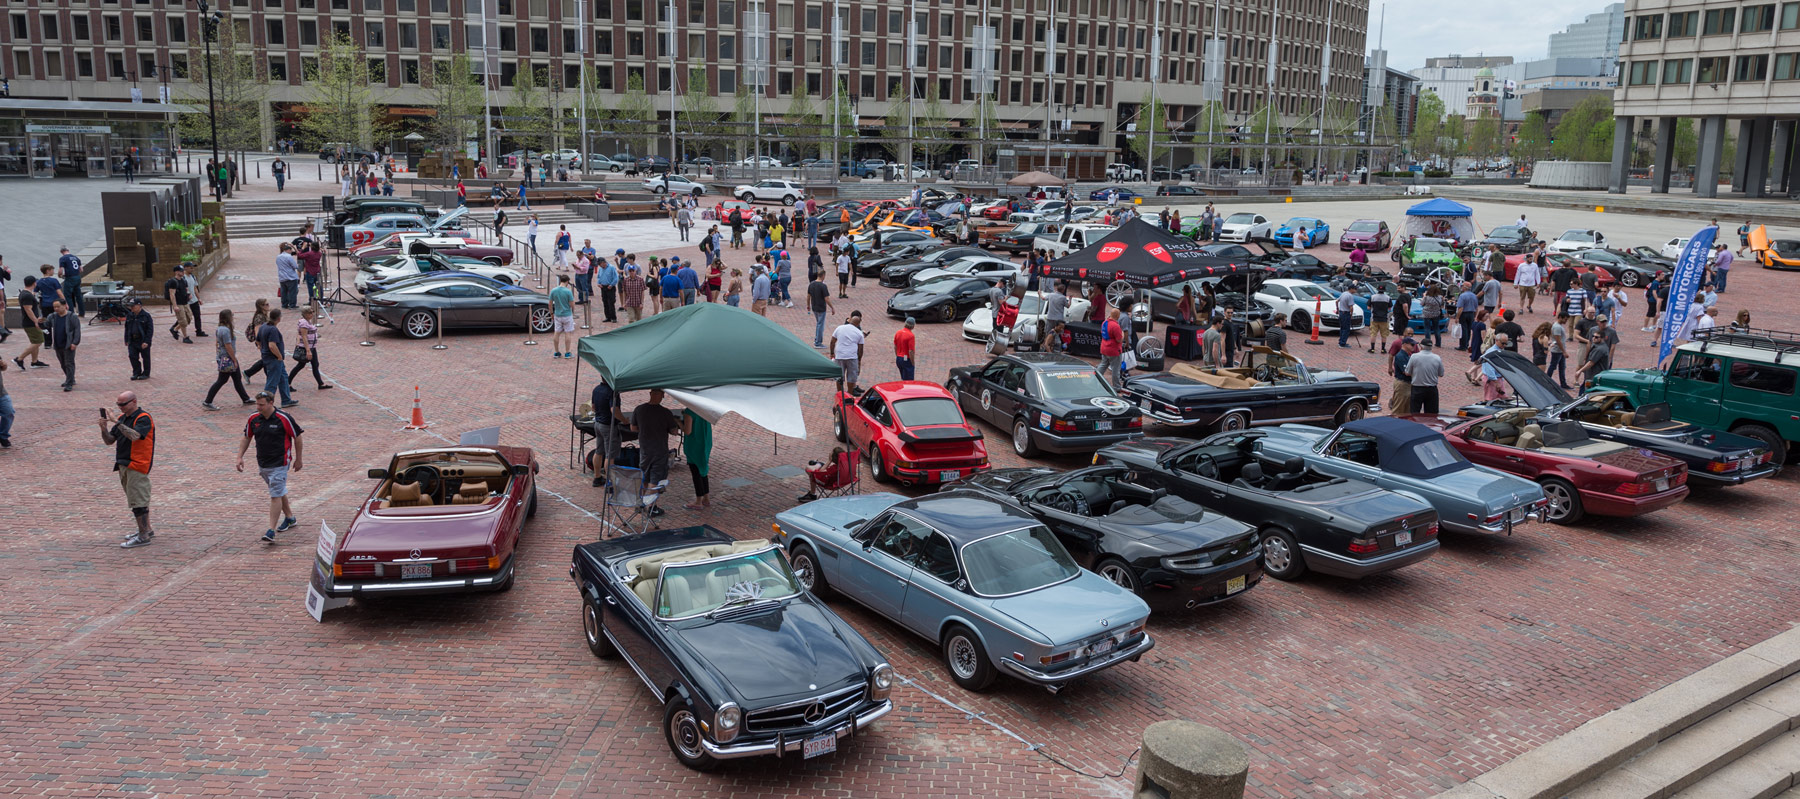 Art of the Automible, Copley Square, Boston	